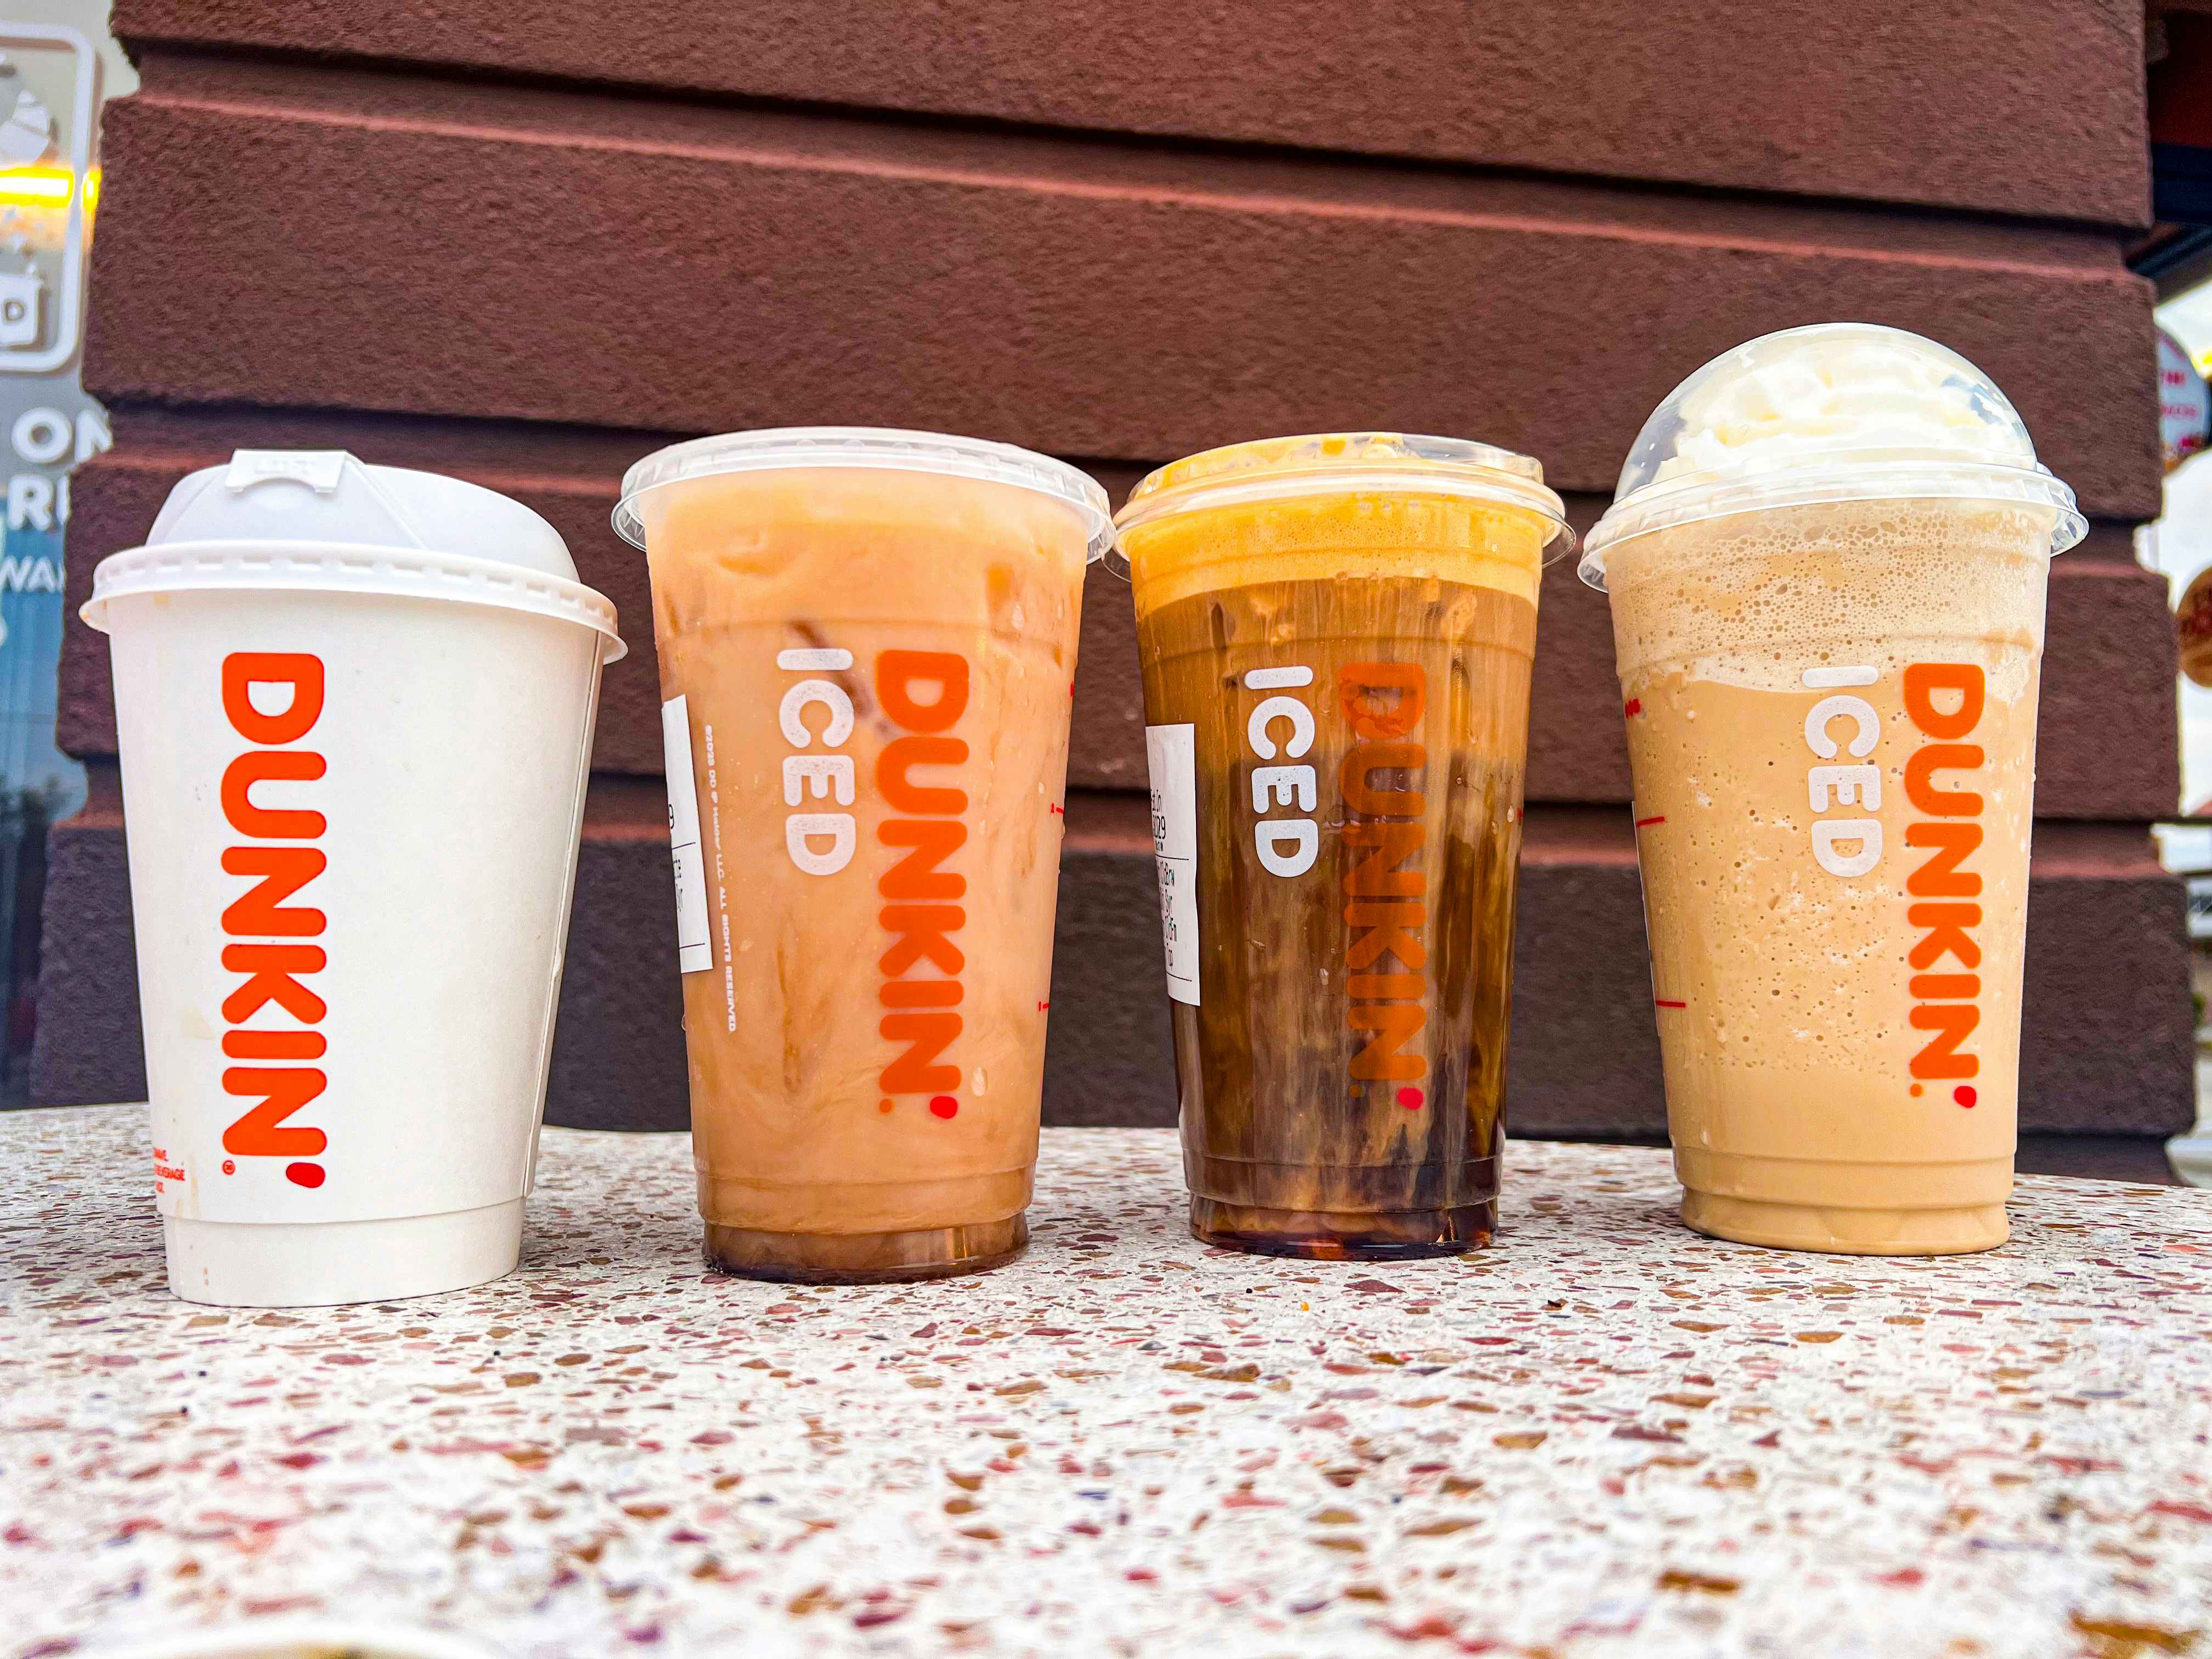 New holdiay flavors at Dunkin Donuts